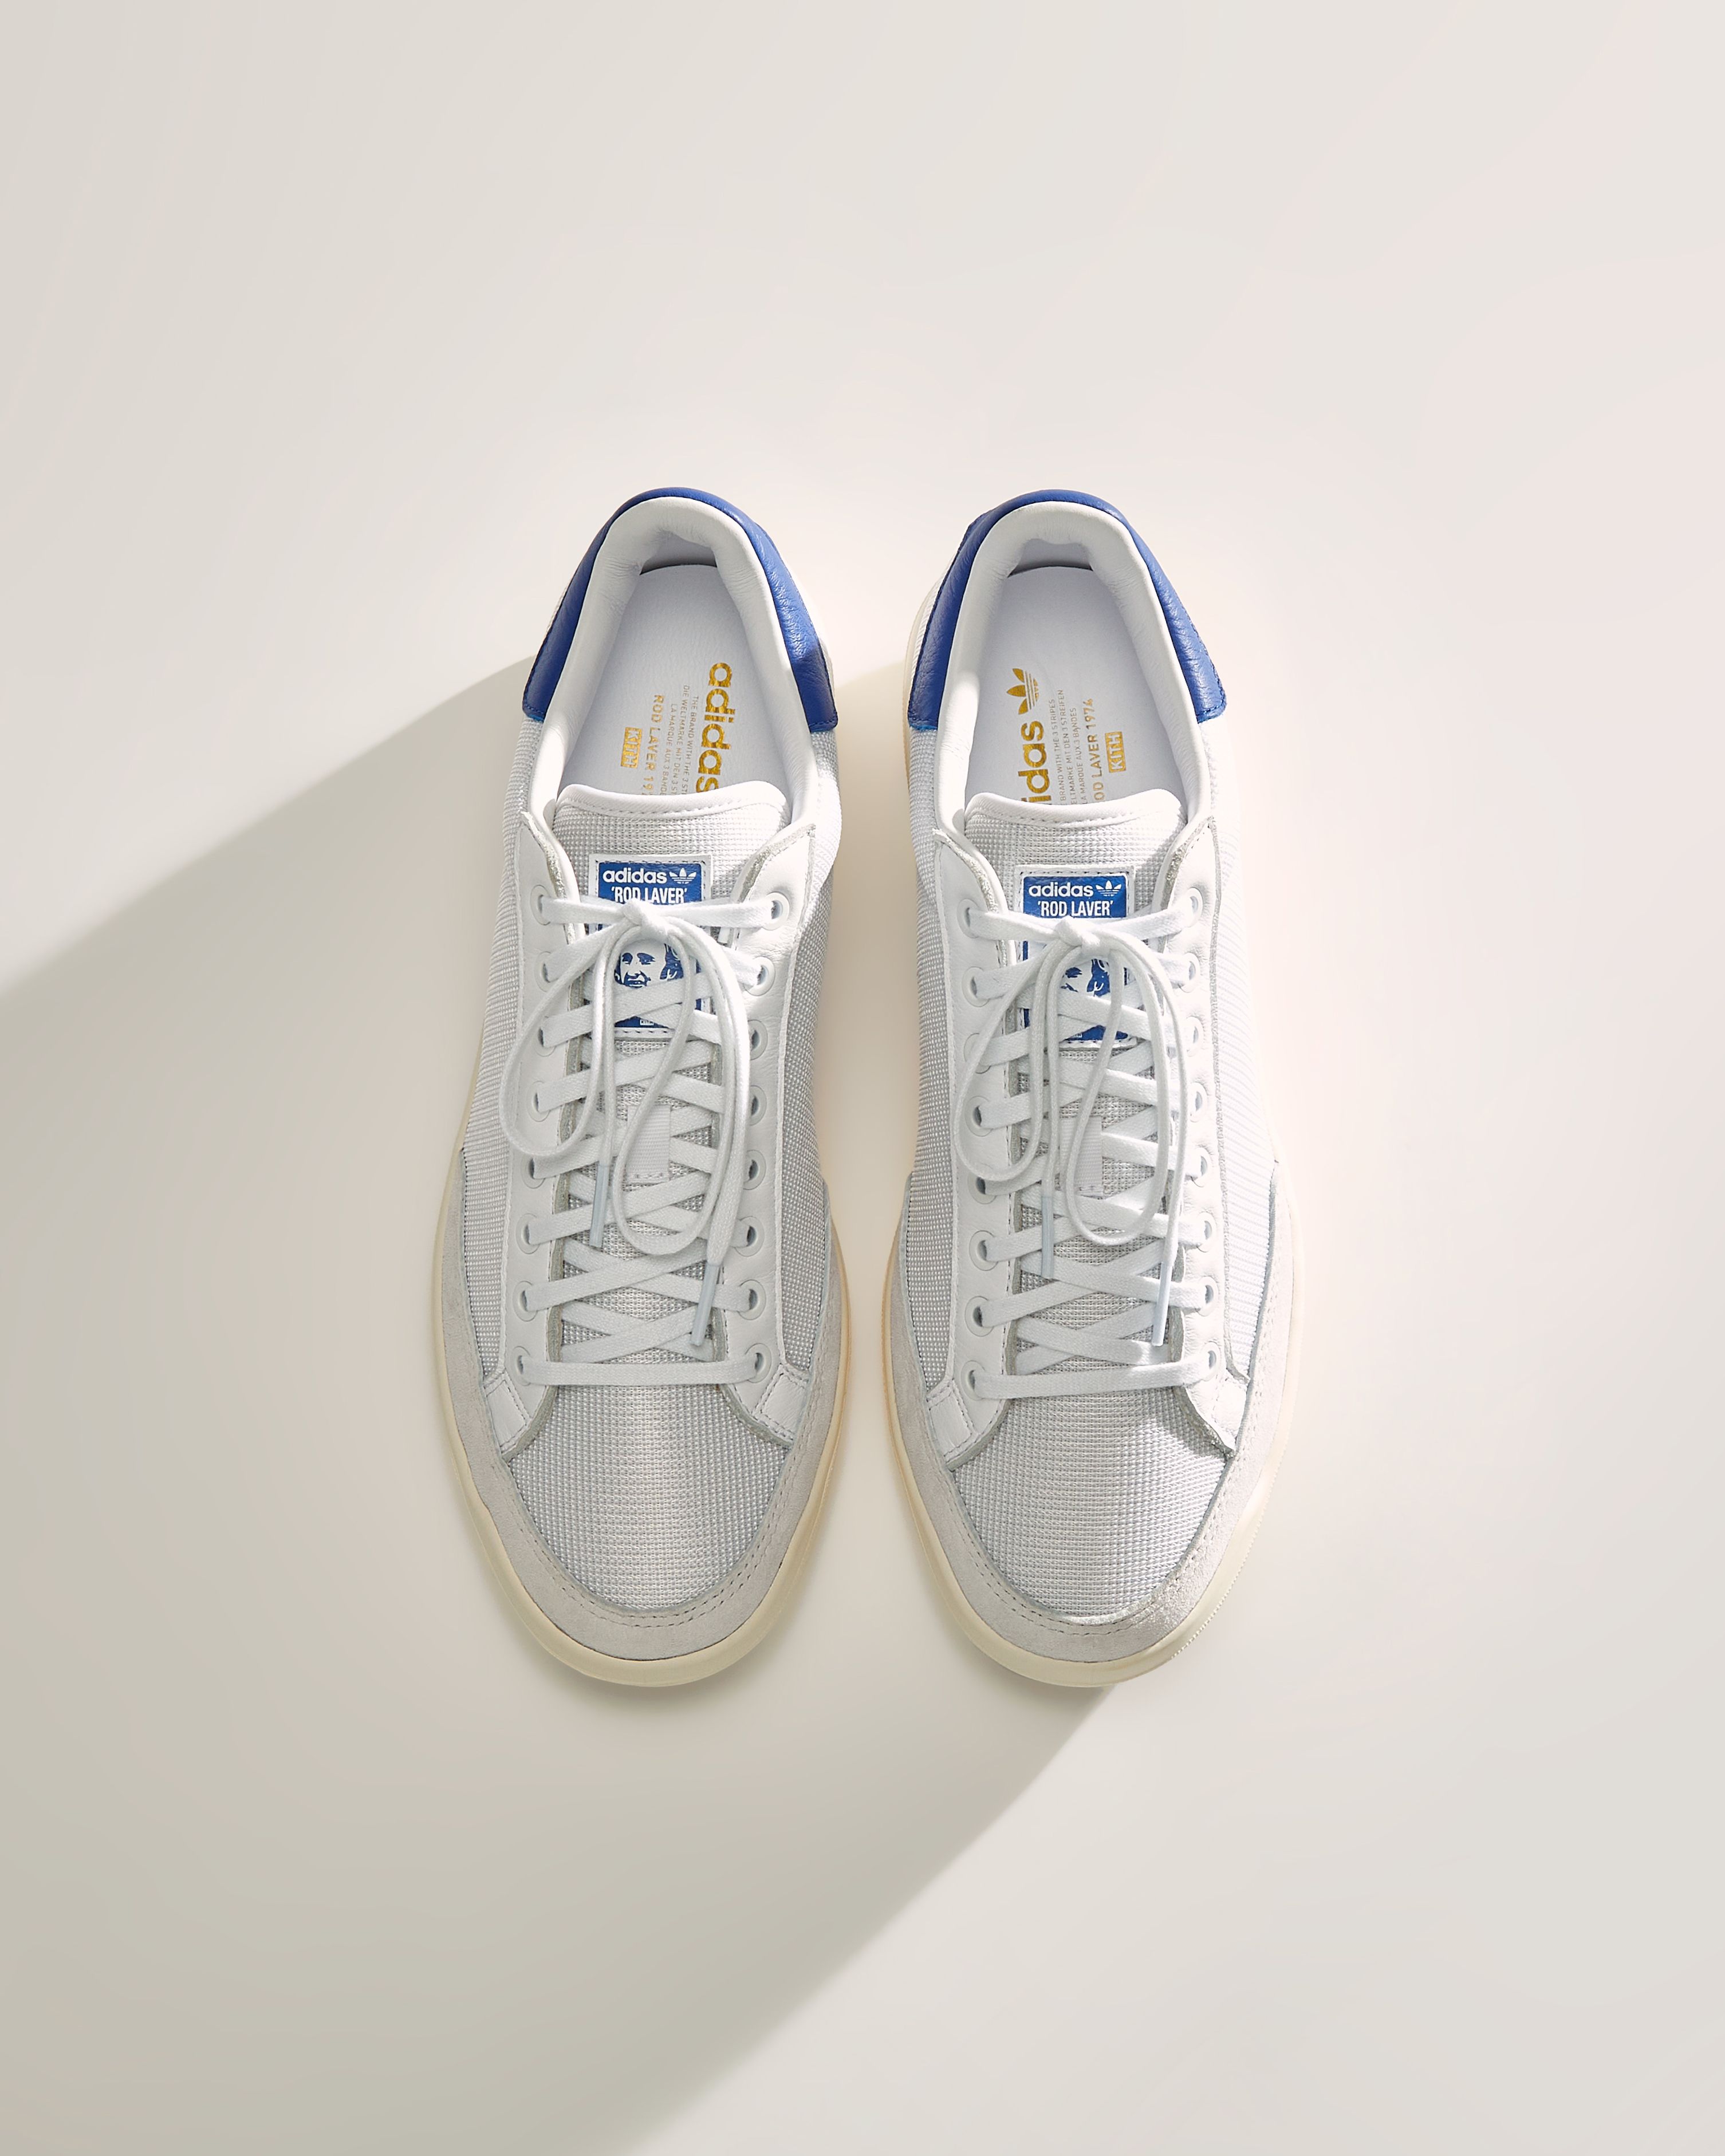 Kith Serves Up a Trio of Classic Adidas Tennis Shoes for Summer 